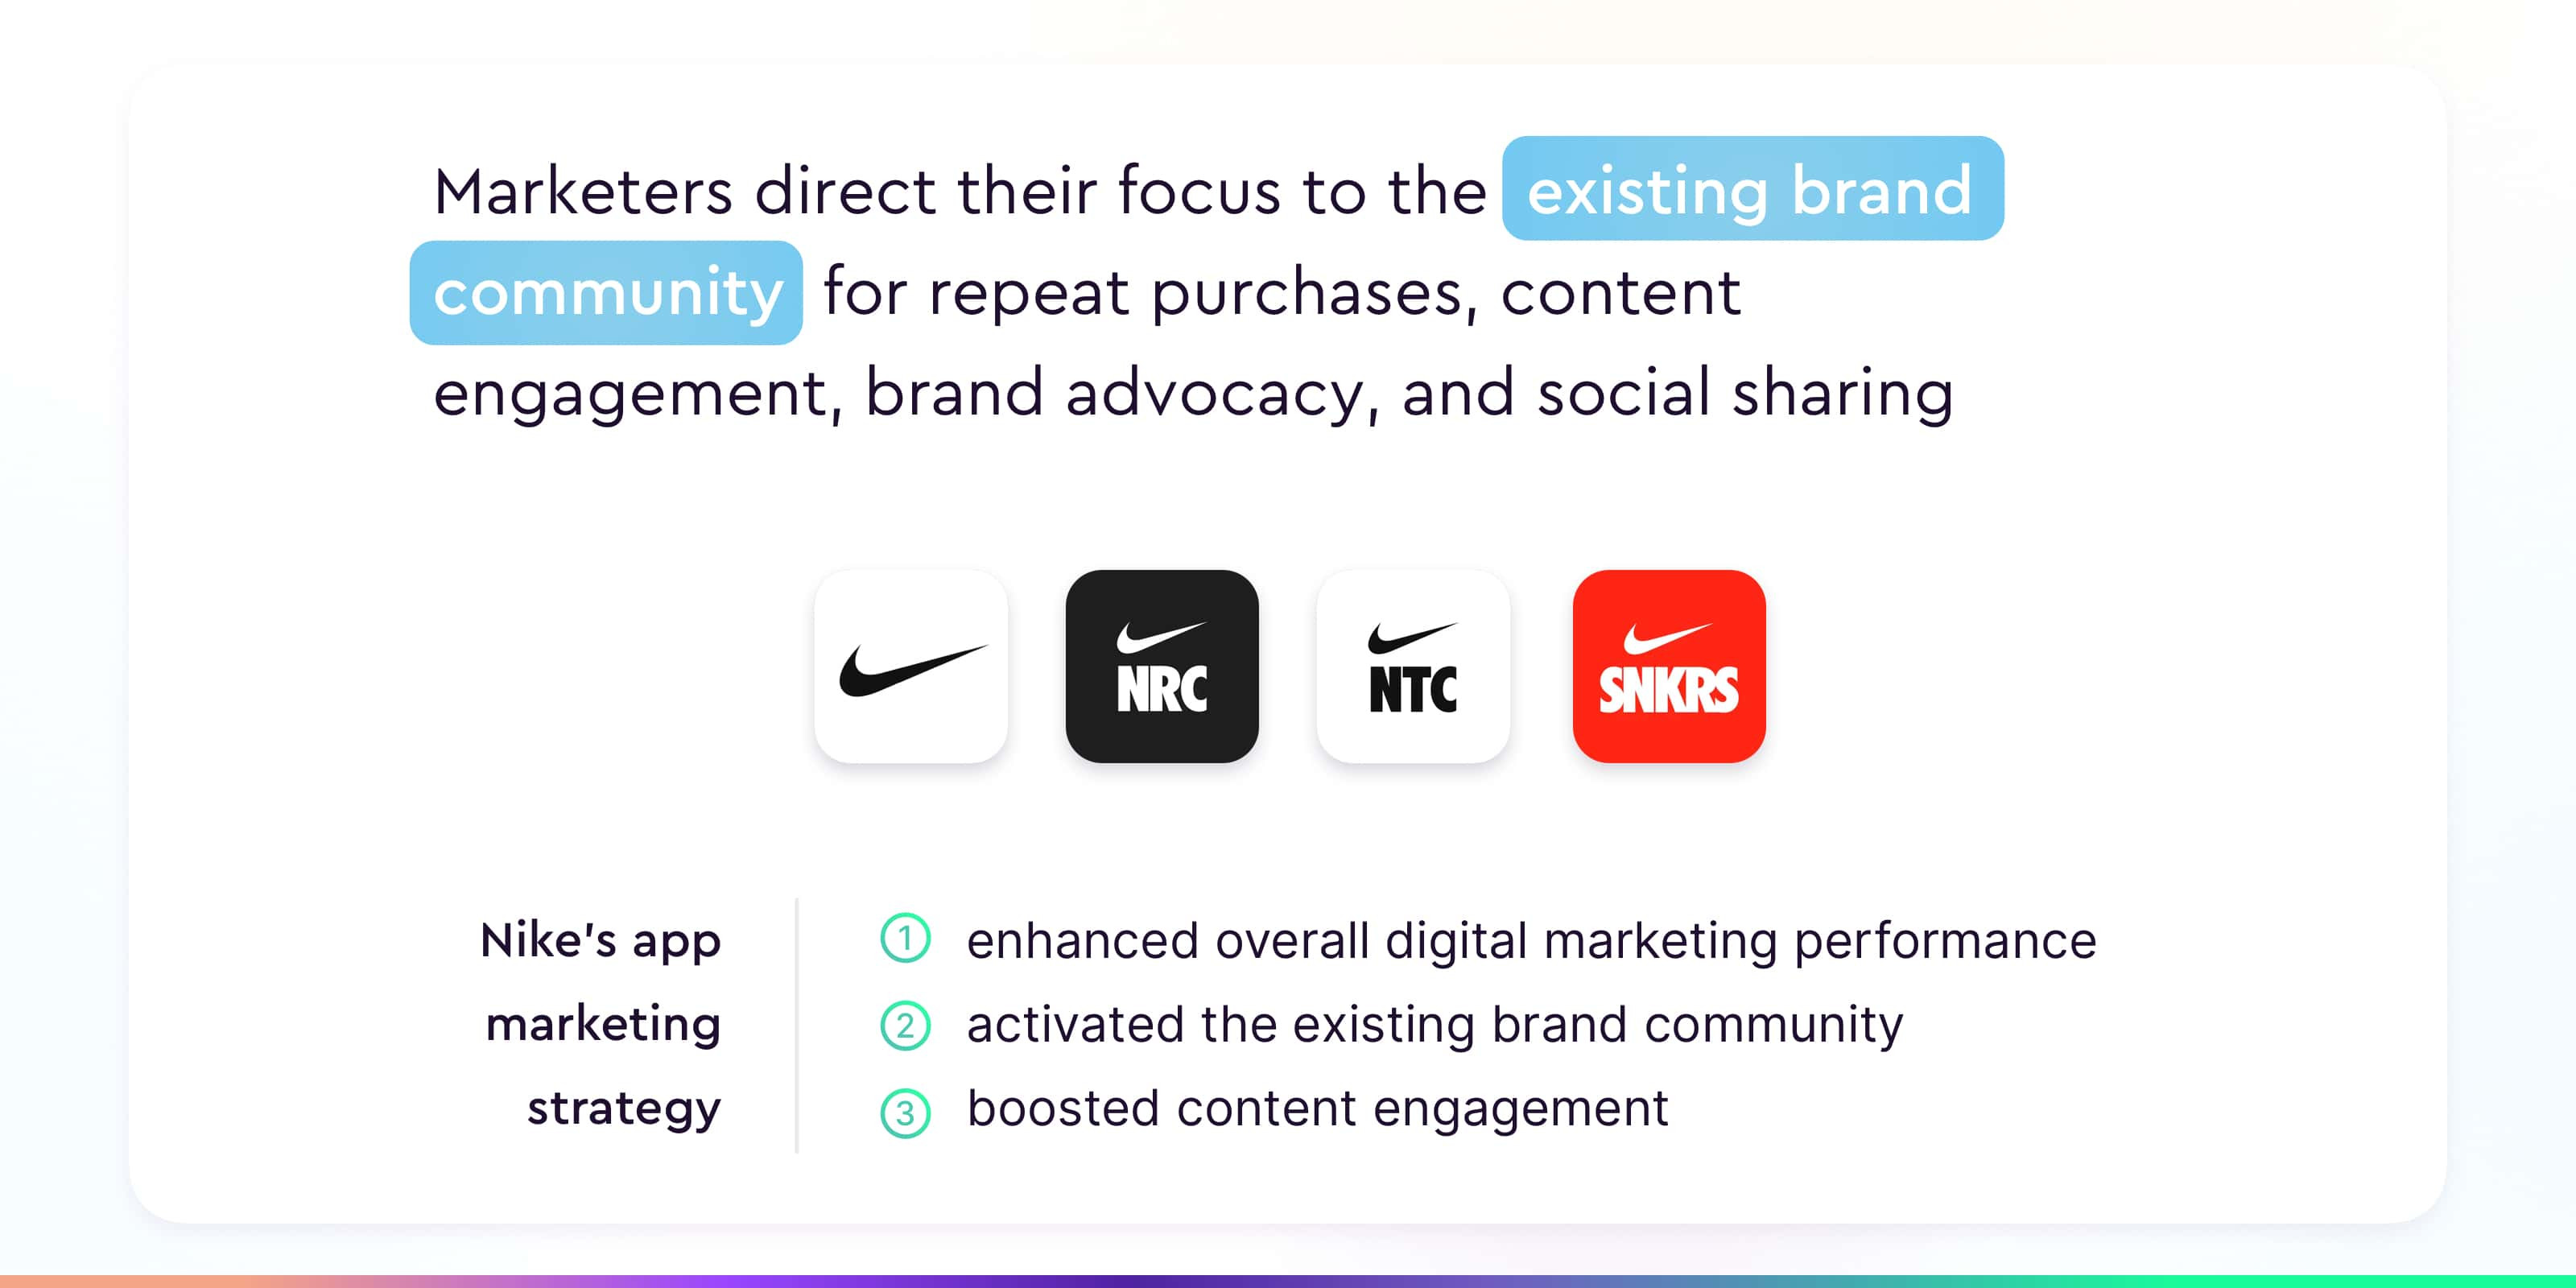 Nike increased content engagement with their app marketing strategy